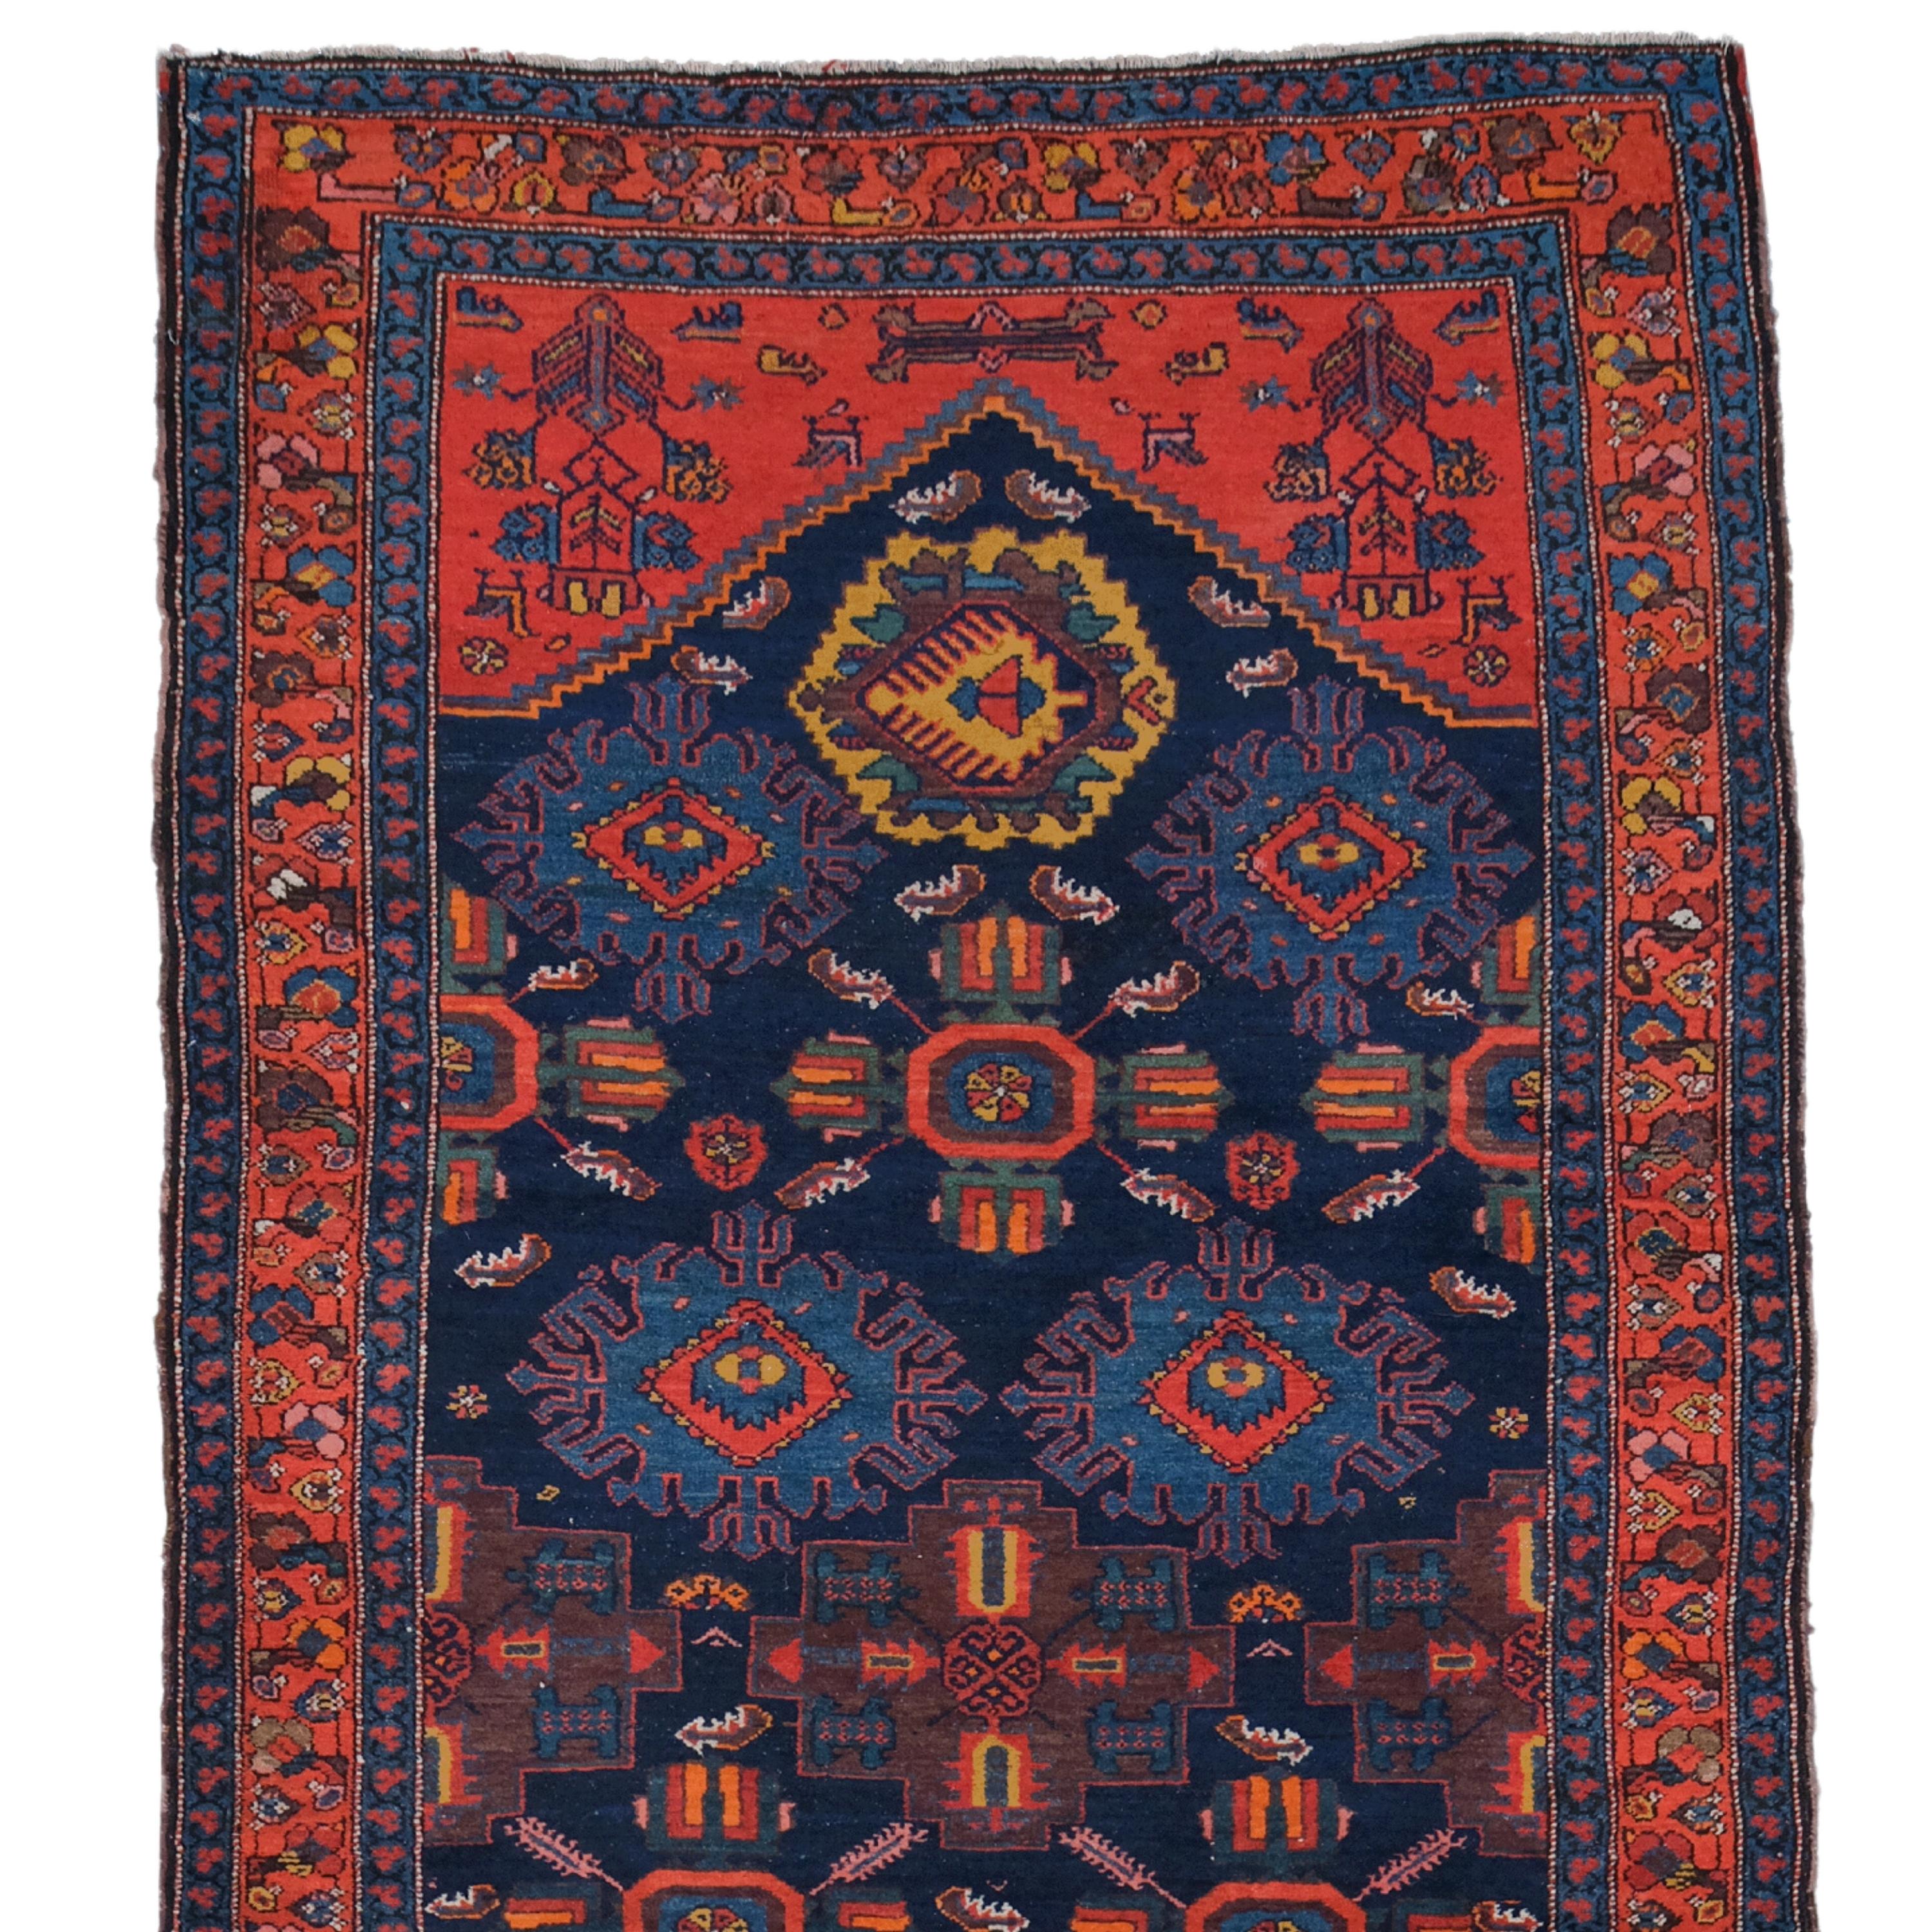 This magnificent runner will take you back in time. Each stitch tells the story of skilled craftsmen who meticulously crafted every detail, creating a rich tapestry of history and art. Vibrant shades of red and blue are as alive today as they were